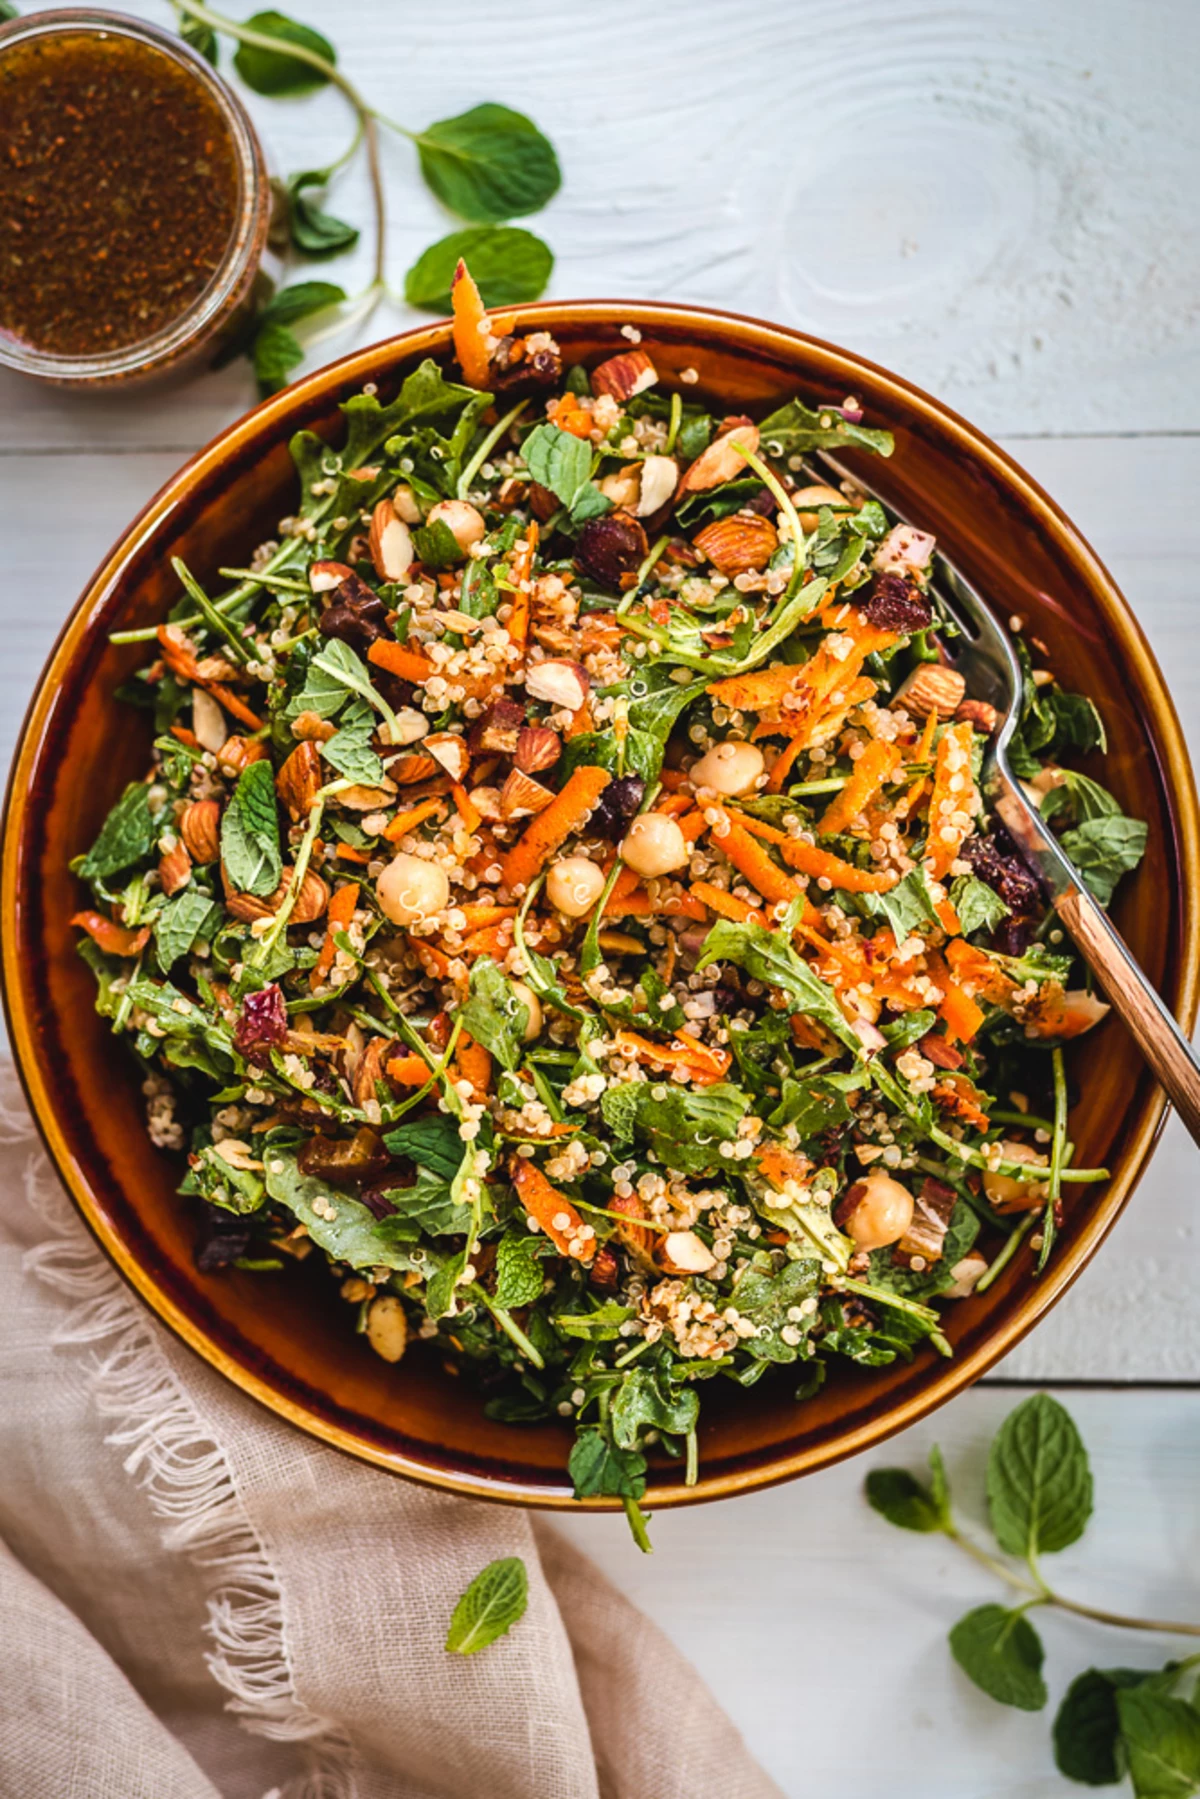 Moroccan-Inspired Salad with Superfoods and Plant-Based Protein | The Beet